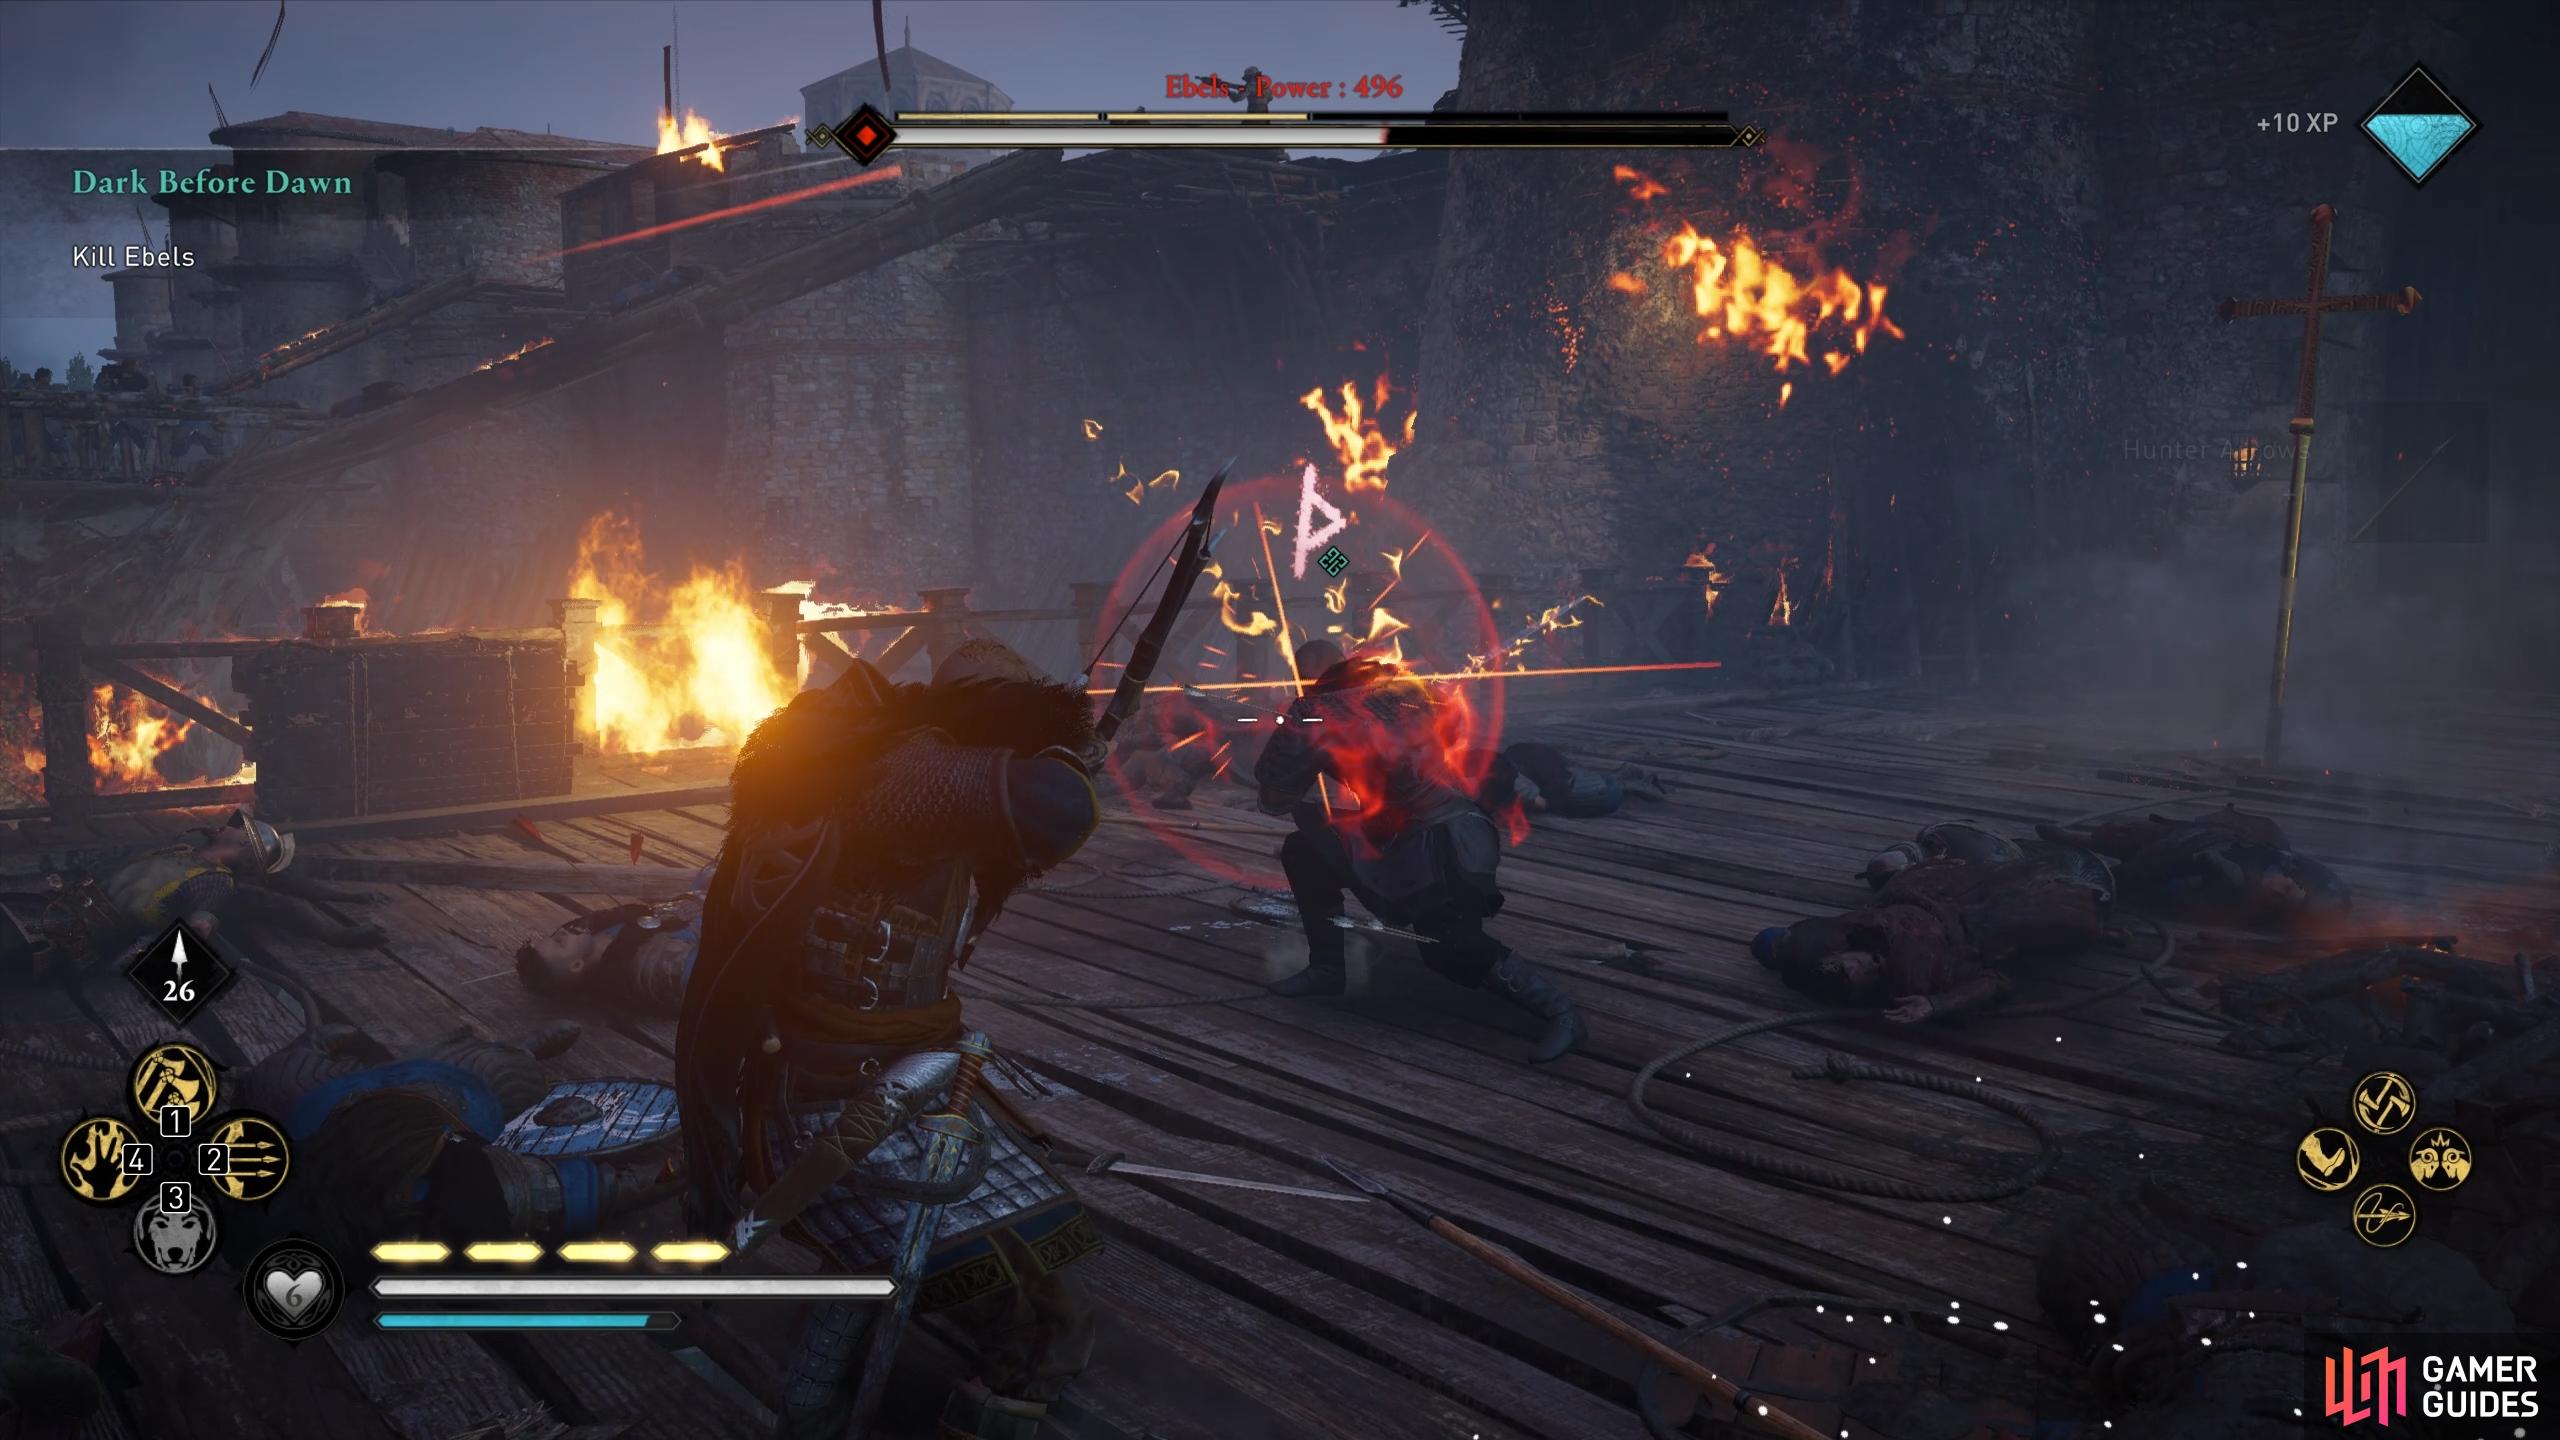 You'll need to dodge or roll away from Ebels' red rune aura attacks, as they can't be parried or blocked.